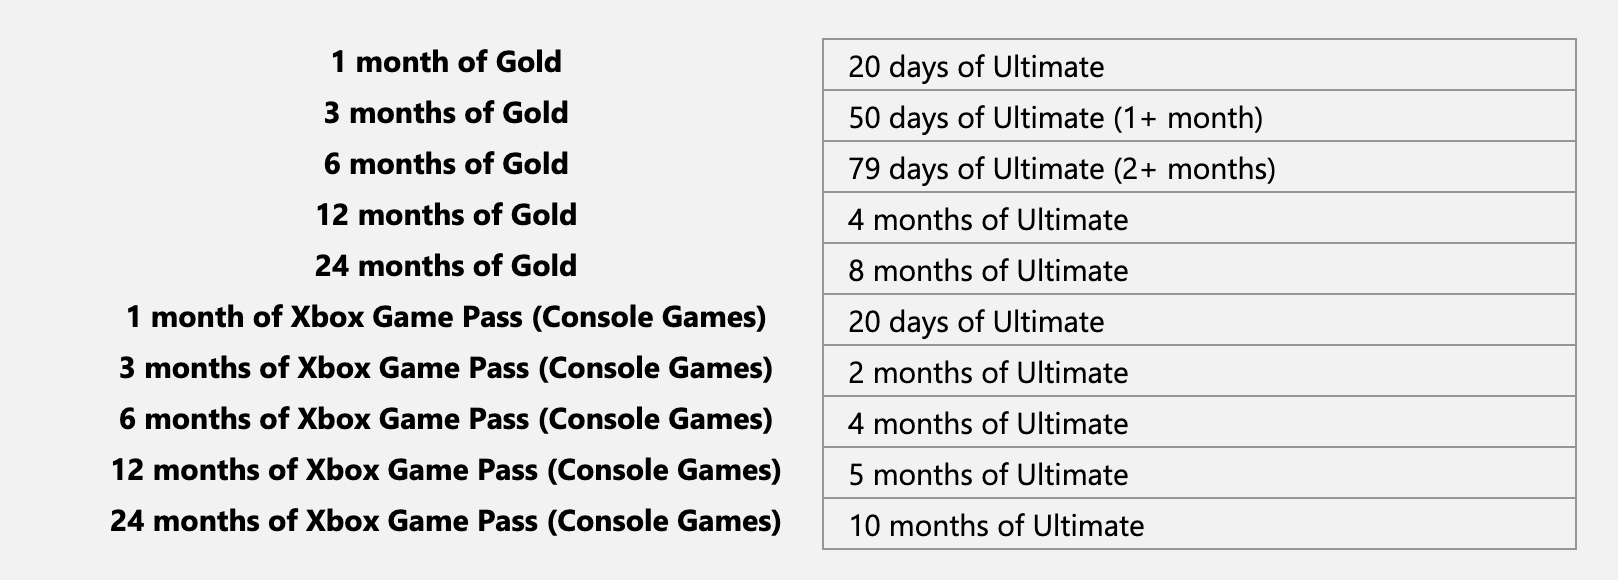 does the ultimate game pass include gold